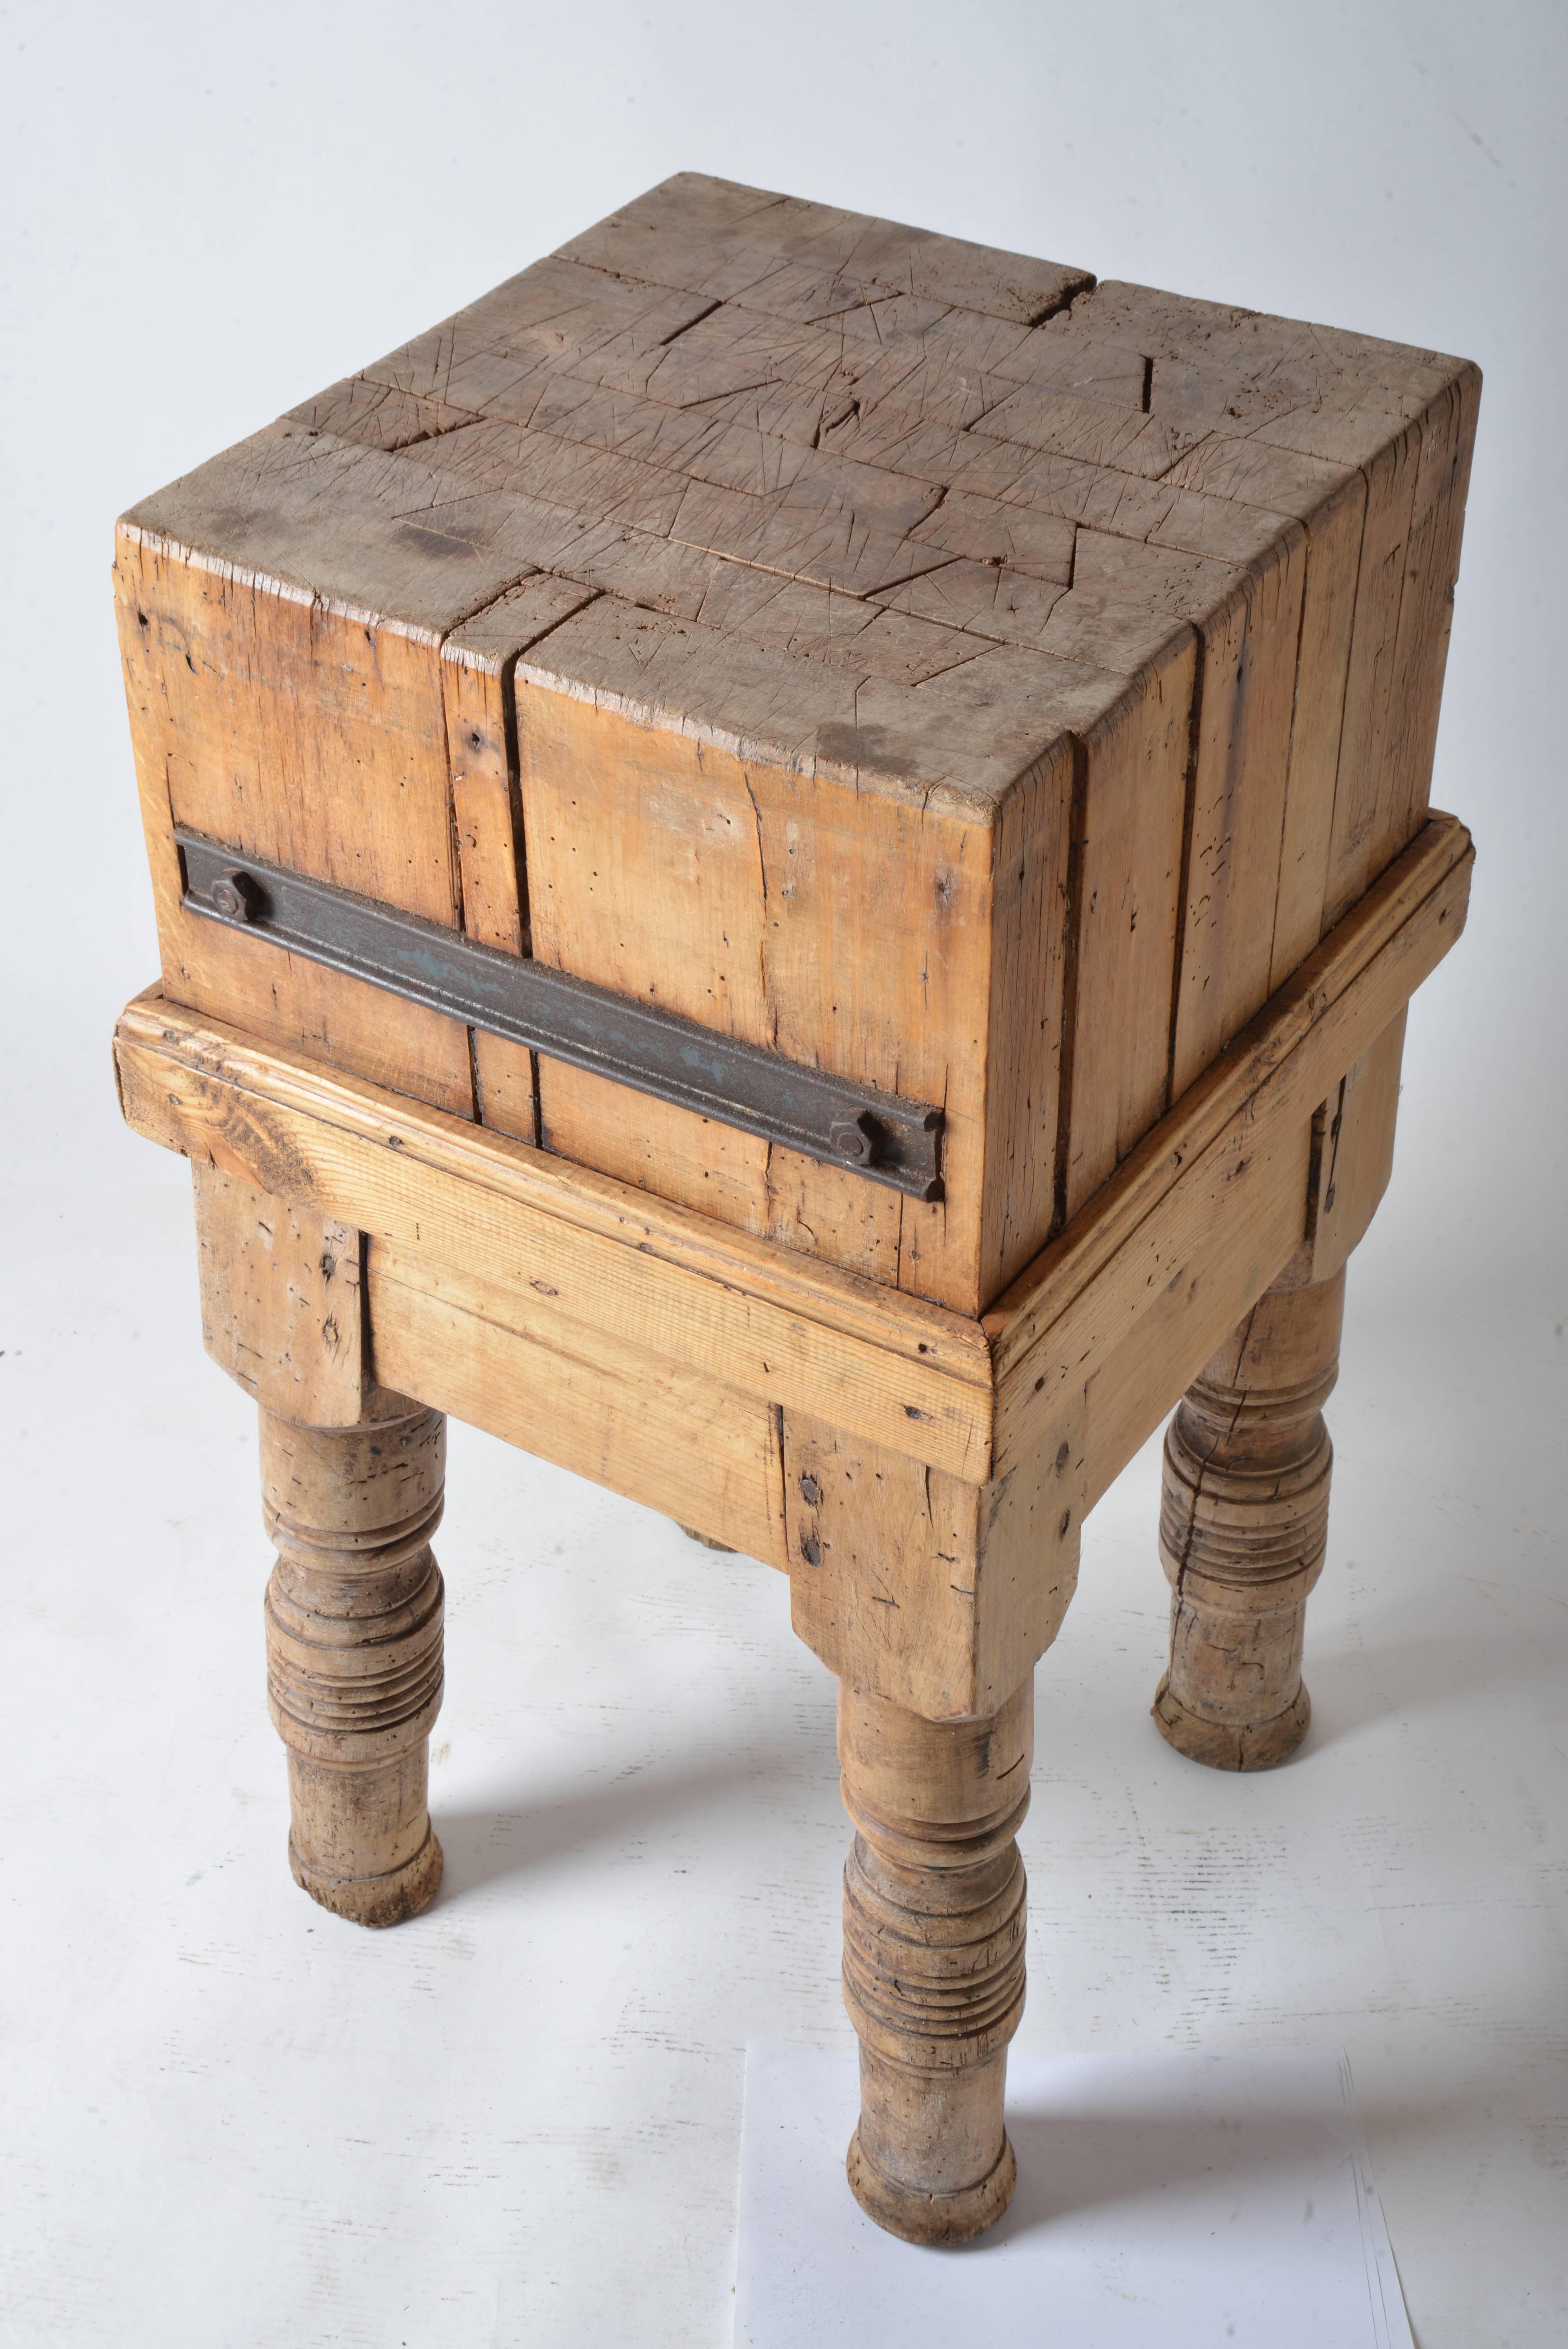 A French billot de boucher (butcher block) on four legged stand. The thick top has a distressed and vintage look from decades of use. The wood has a wonderful patina. Steel corner braces.